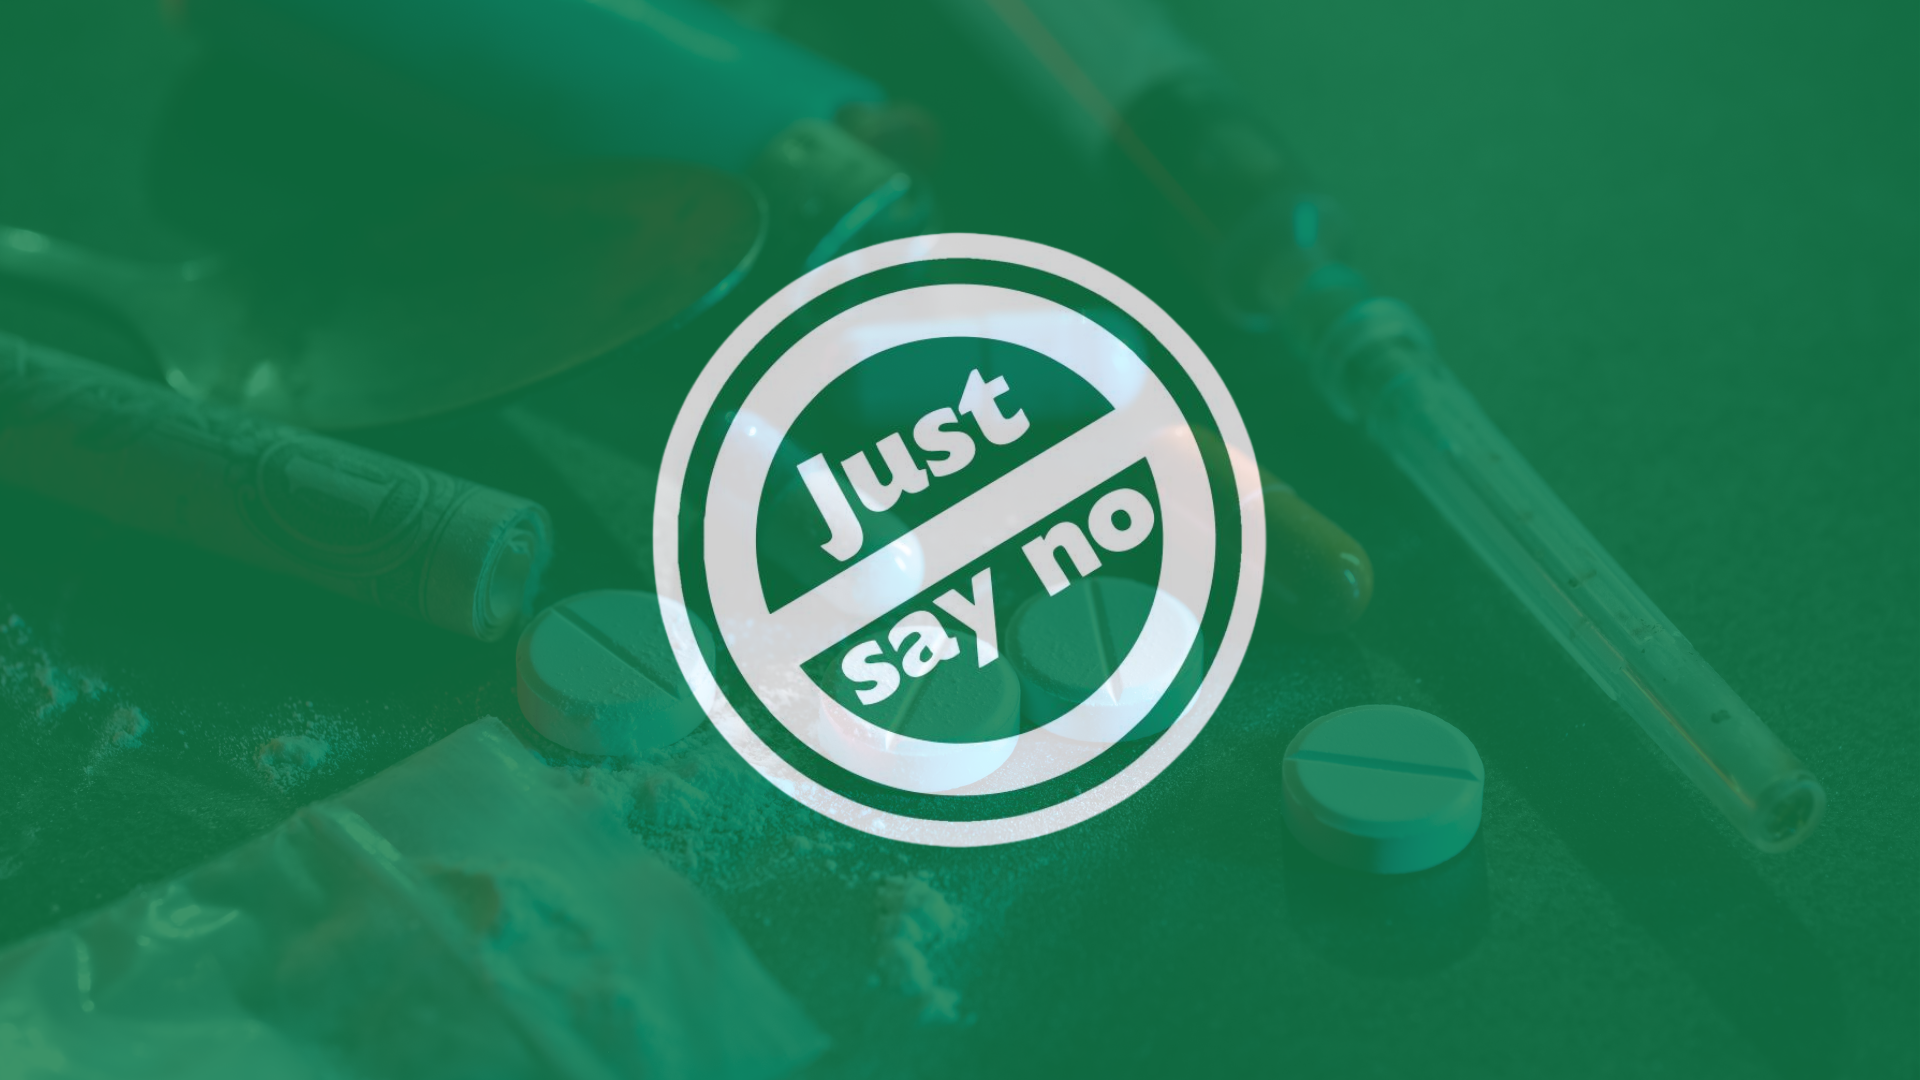 “Just Say No”: The Campaign that Defined the Fight Against Drugs.